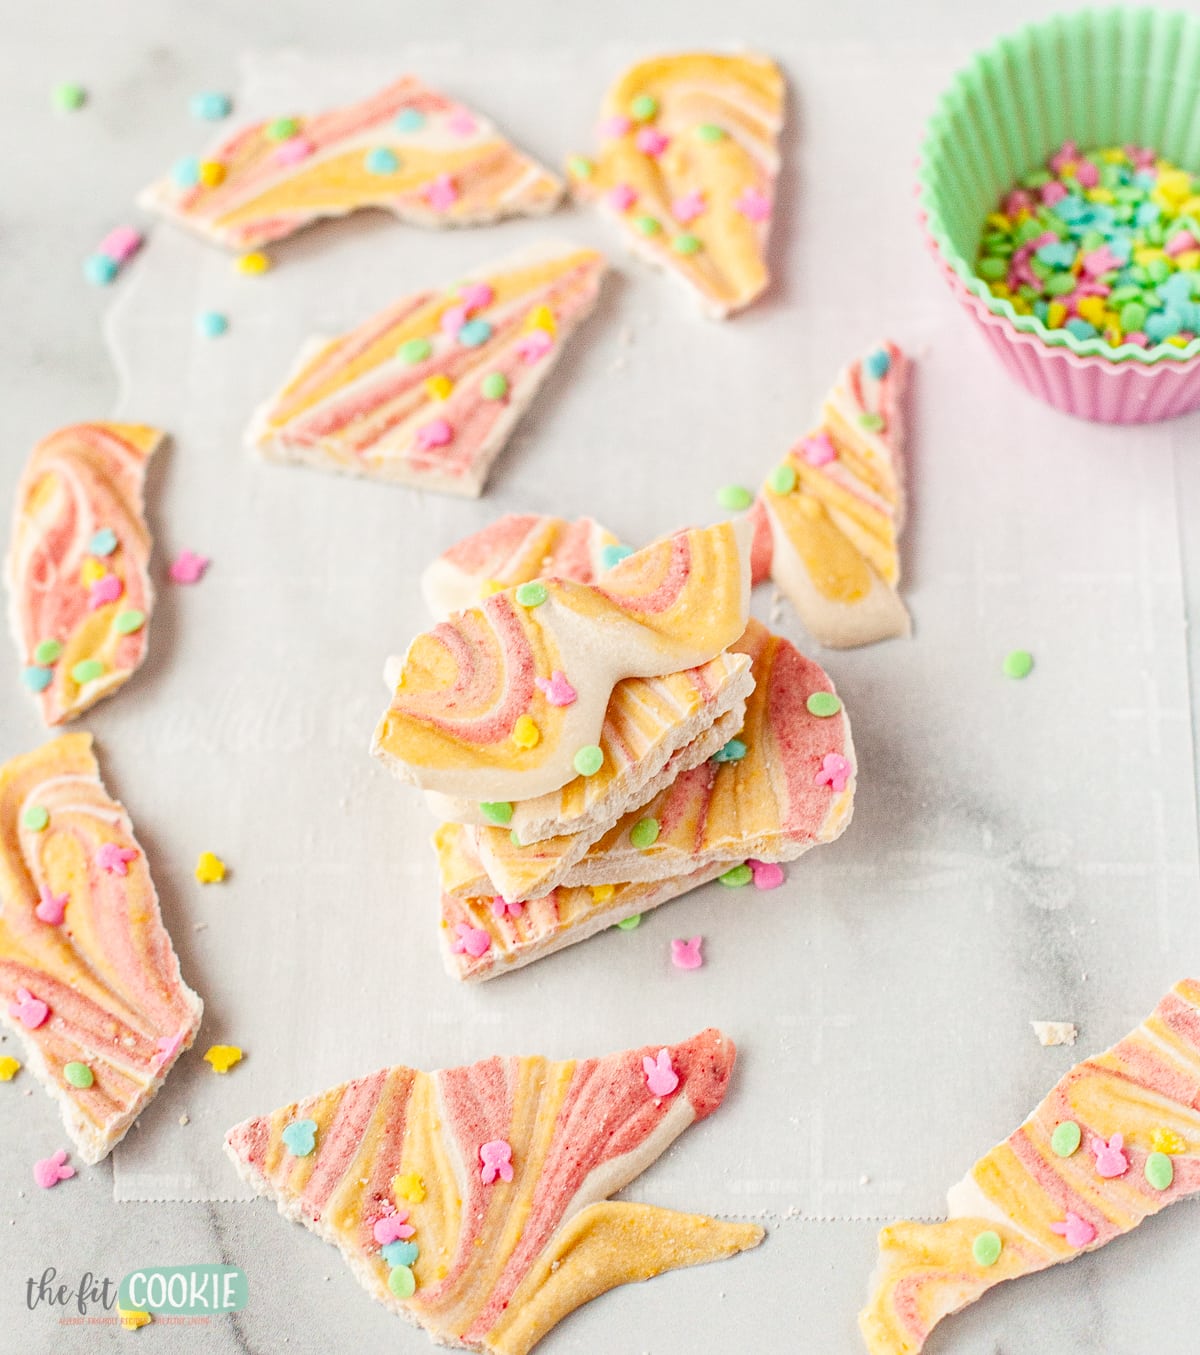 photo of pieces of stacked dairy free white chocolate bark with pastel color swirls.  